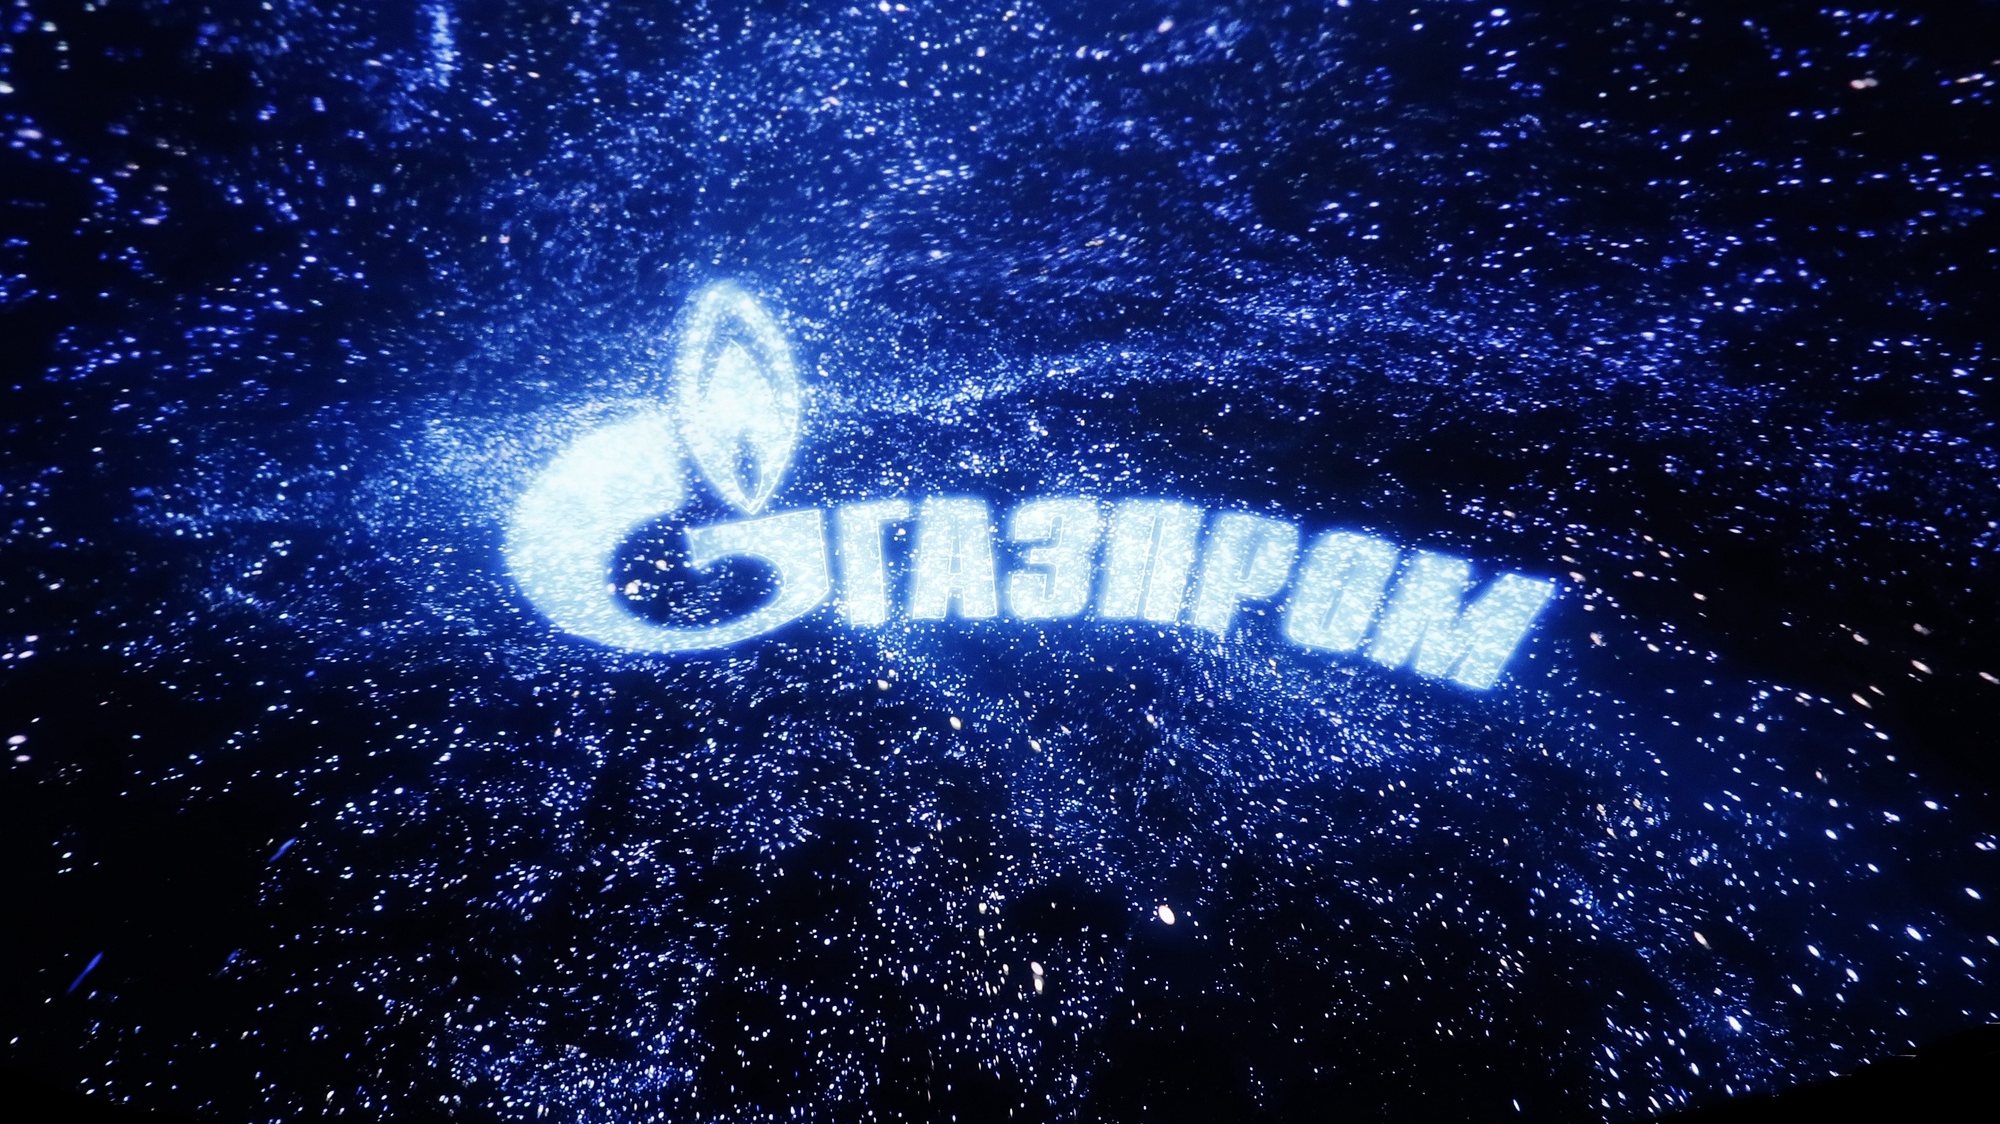 epa10966603 A screen shows a logo of Russian energy corporation Gazprom during the International Exhibition-forum Russia at the All-Russian Exhibition Center (VDNH) in Moscow, Russia, 09 November 2023. The International Exhibition-forum Russia, designed to demonstrate Russian main achievements in technology, science, tourism and culture, runs from 04 November 2023 to 12 April 2024.  EPA/MAXIM SHIPENKOV